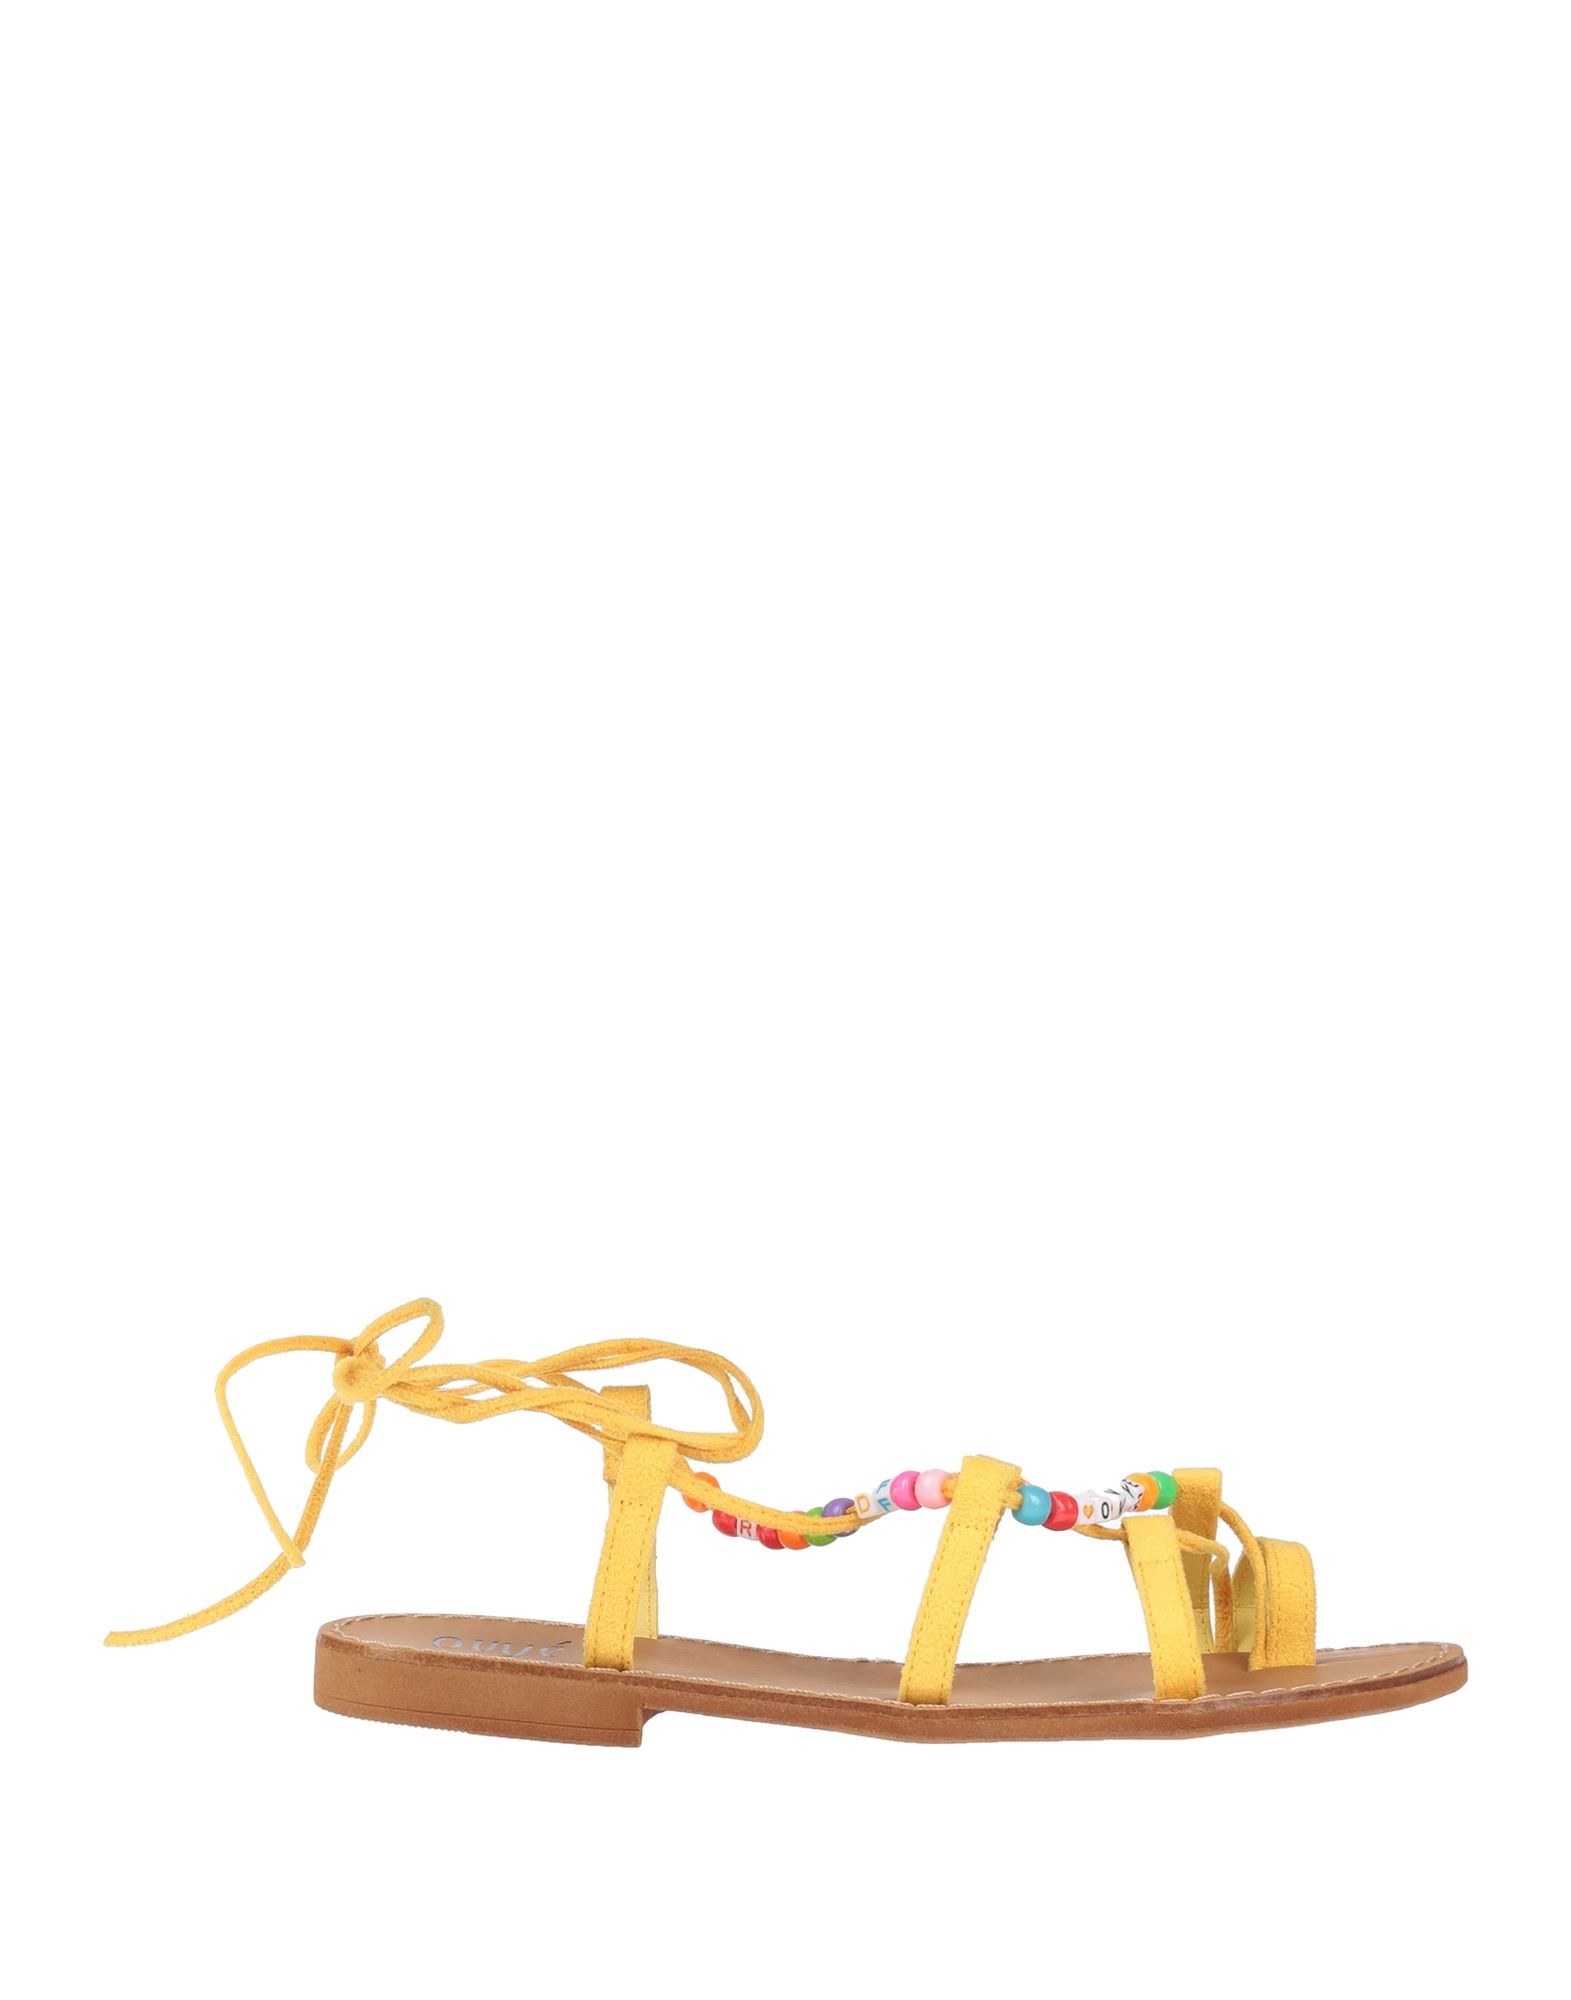 Ovye' By Cristina Lucchi Toe Strap Sandals In Yellow